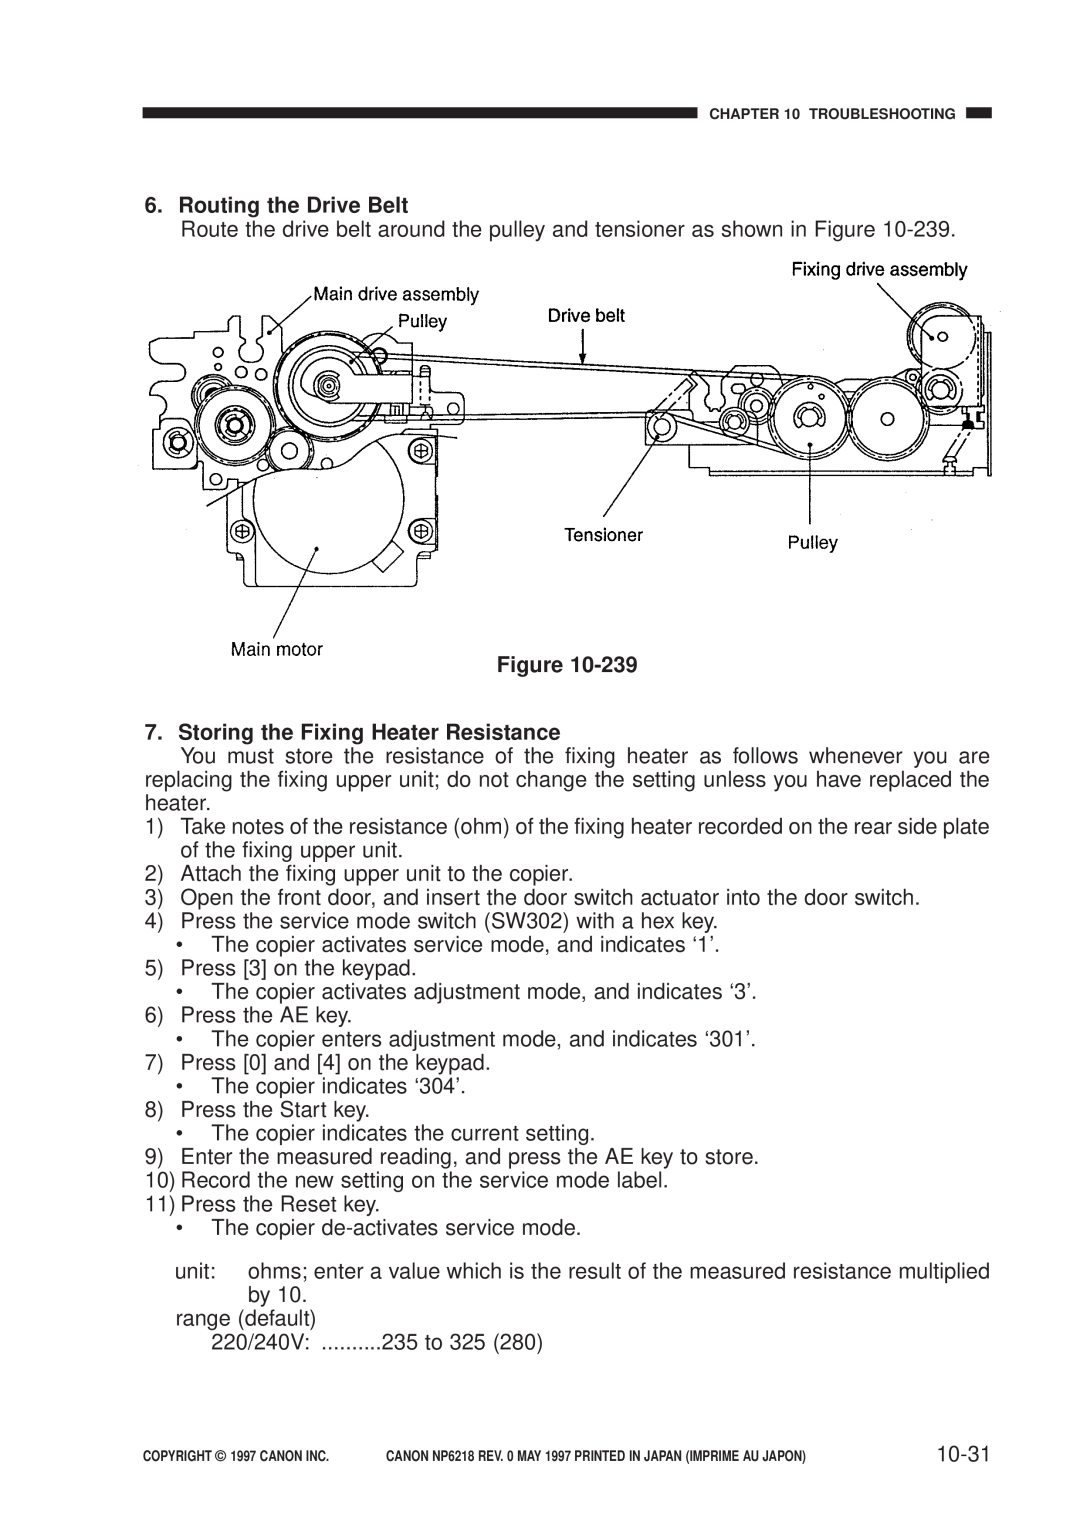 Canon FY8-13EX-000, NP6218 service manual Routing the Drive Belt, Storing the Fixing Heater Resistance, 10-31 